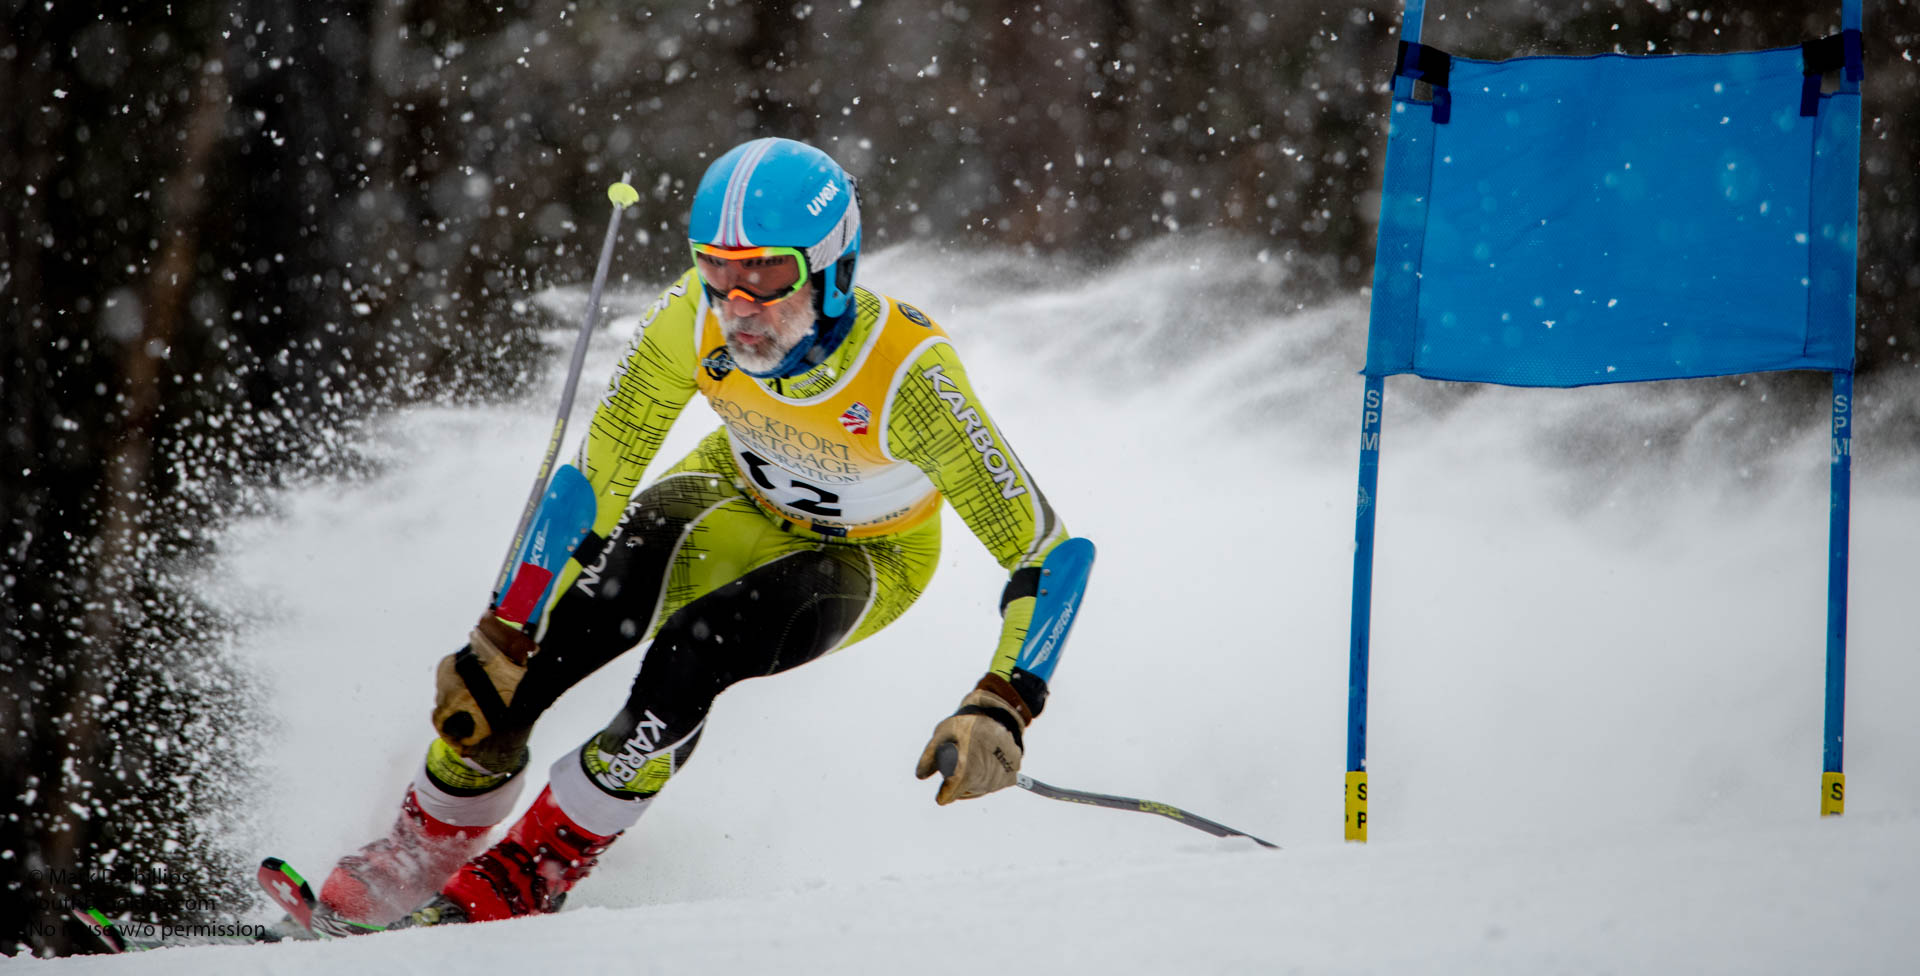 Derek Griggs races in heavy snow at the USSA Masters GS double race at Berkshire East Ski Area in Charlemont, MA. ©Mark D Phillips